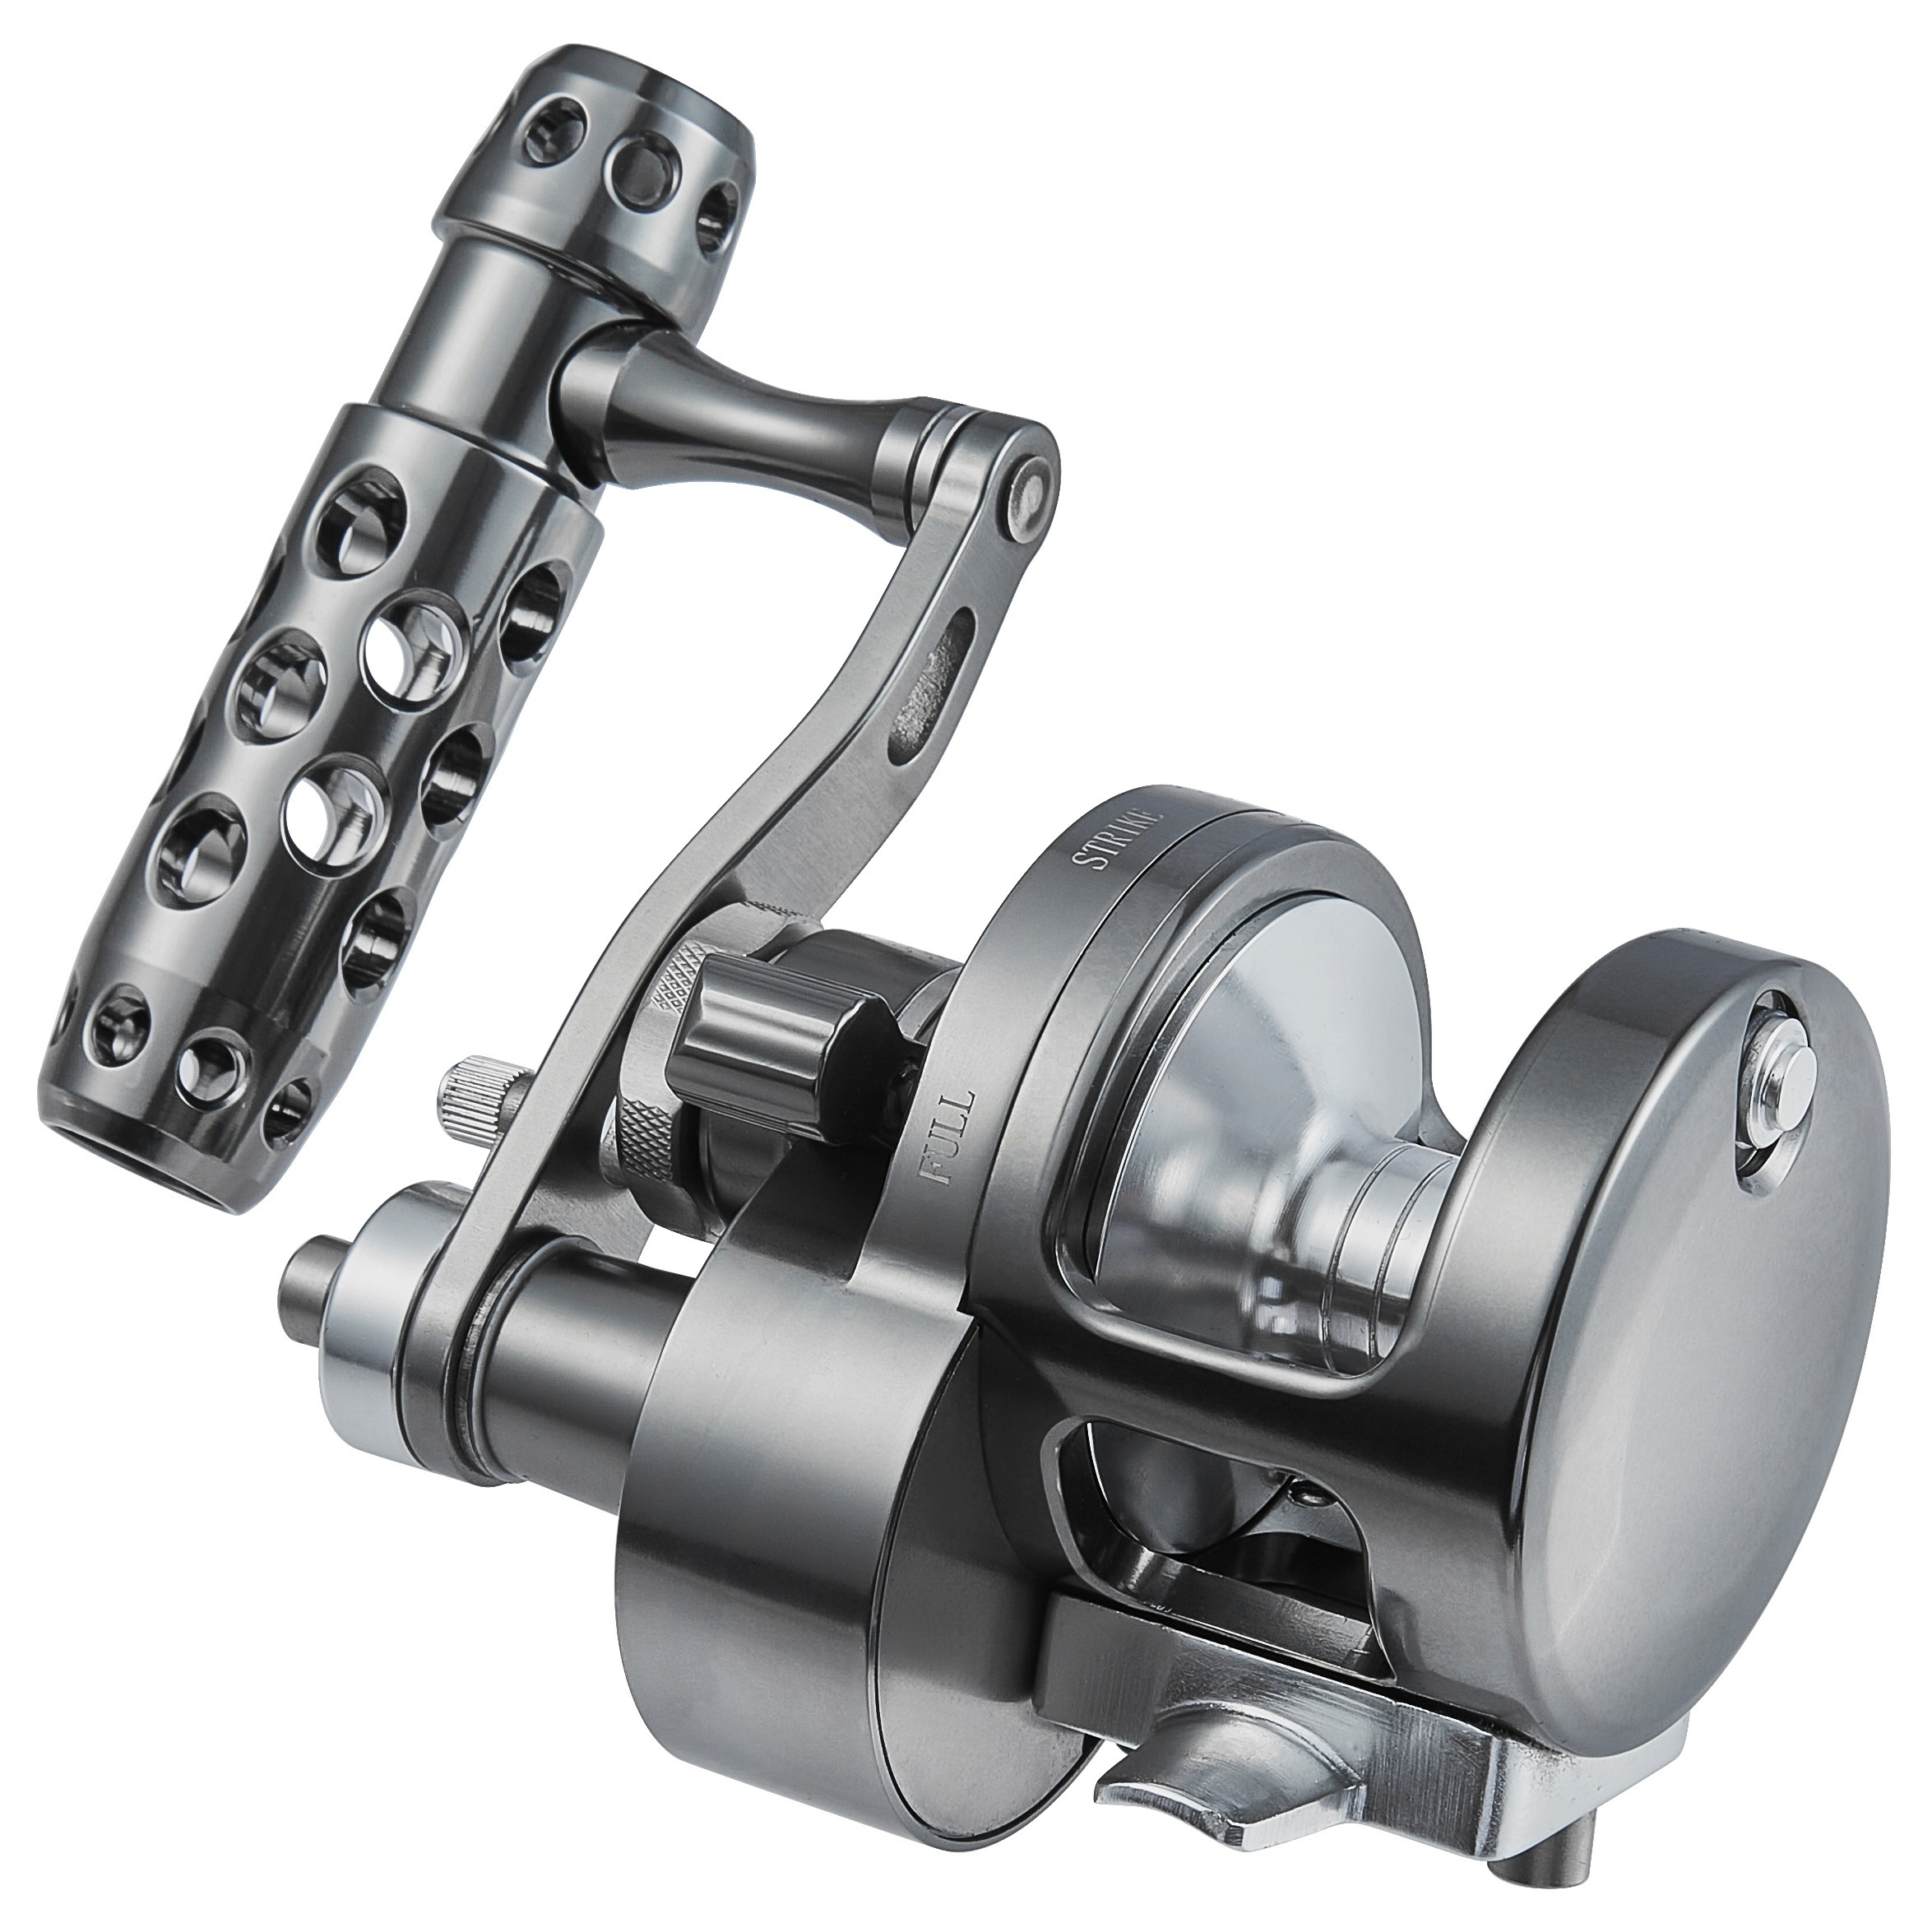 High Performance Two Speed Lever Drag Jigging Reel for Ocean Boat Big Game  Fishing - CNC Machined Aluminum, 23LB/14KG Max Drag